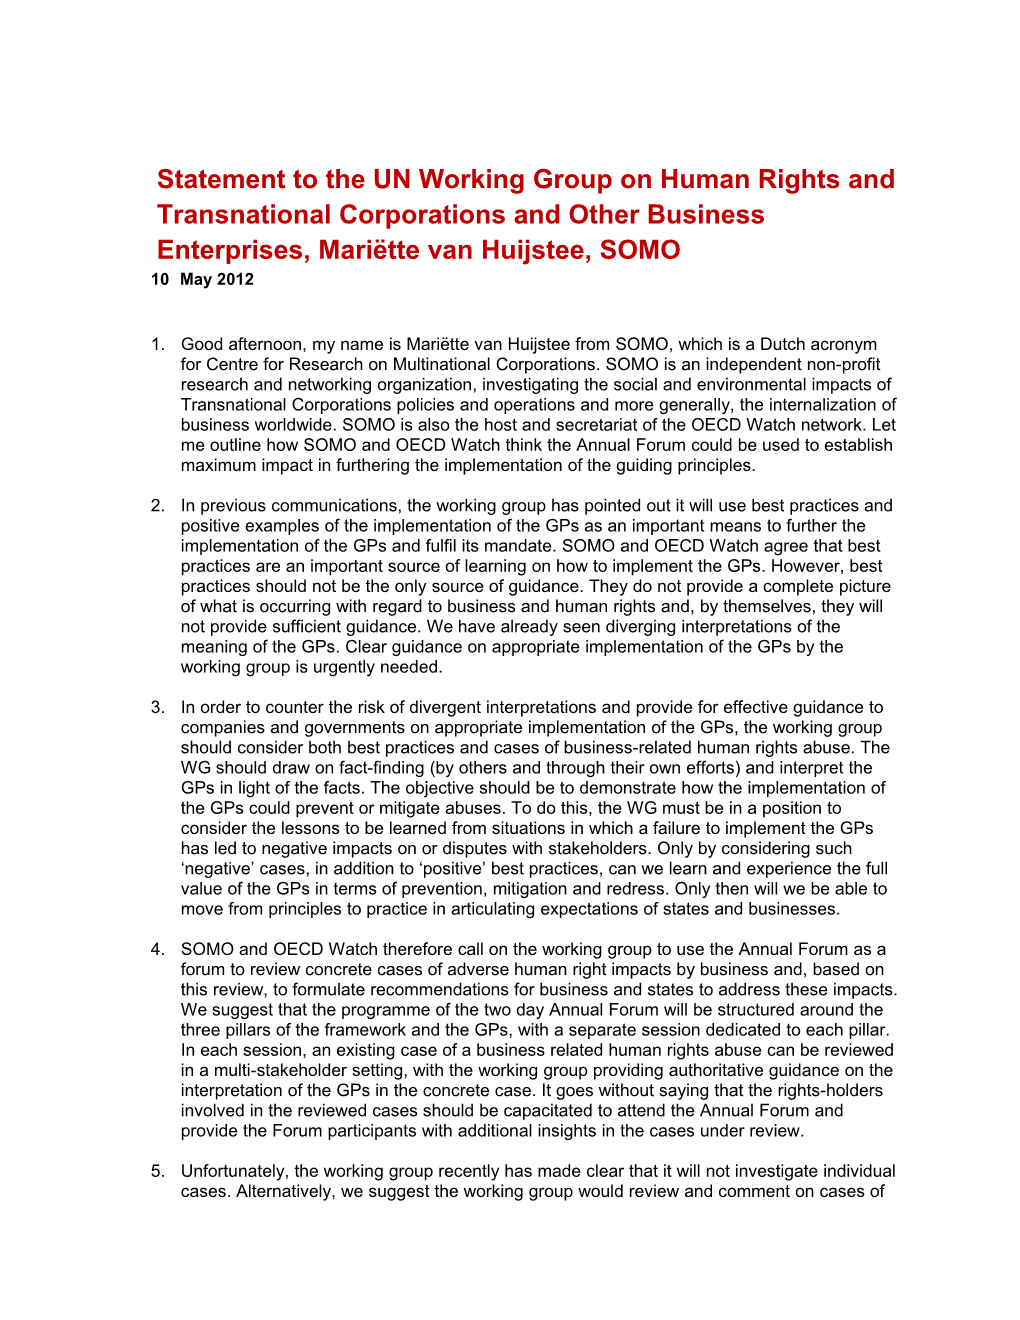 Statement to the UN Working Group on Human Rights and Transnational Corporations and Other